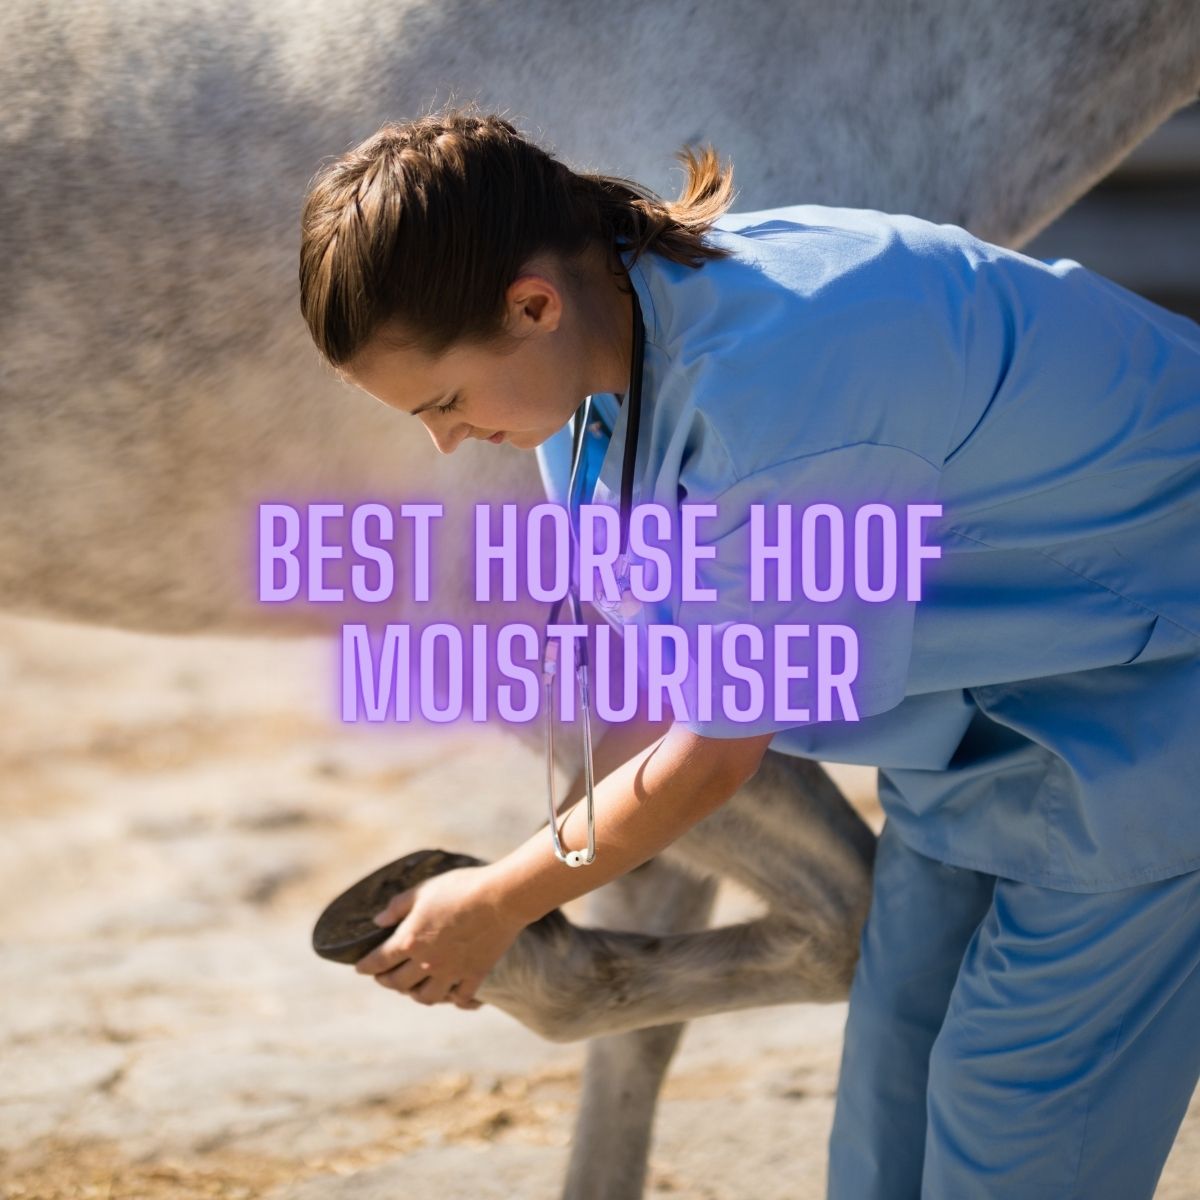 You are currently viewing Best Horse Hoof Moisturiser: Expert Recommendations for 2023